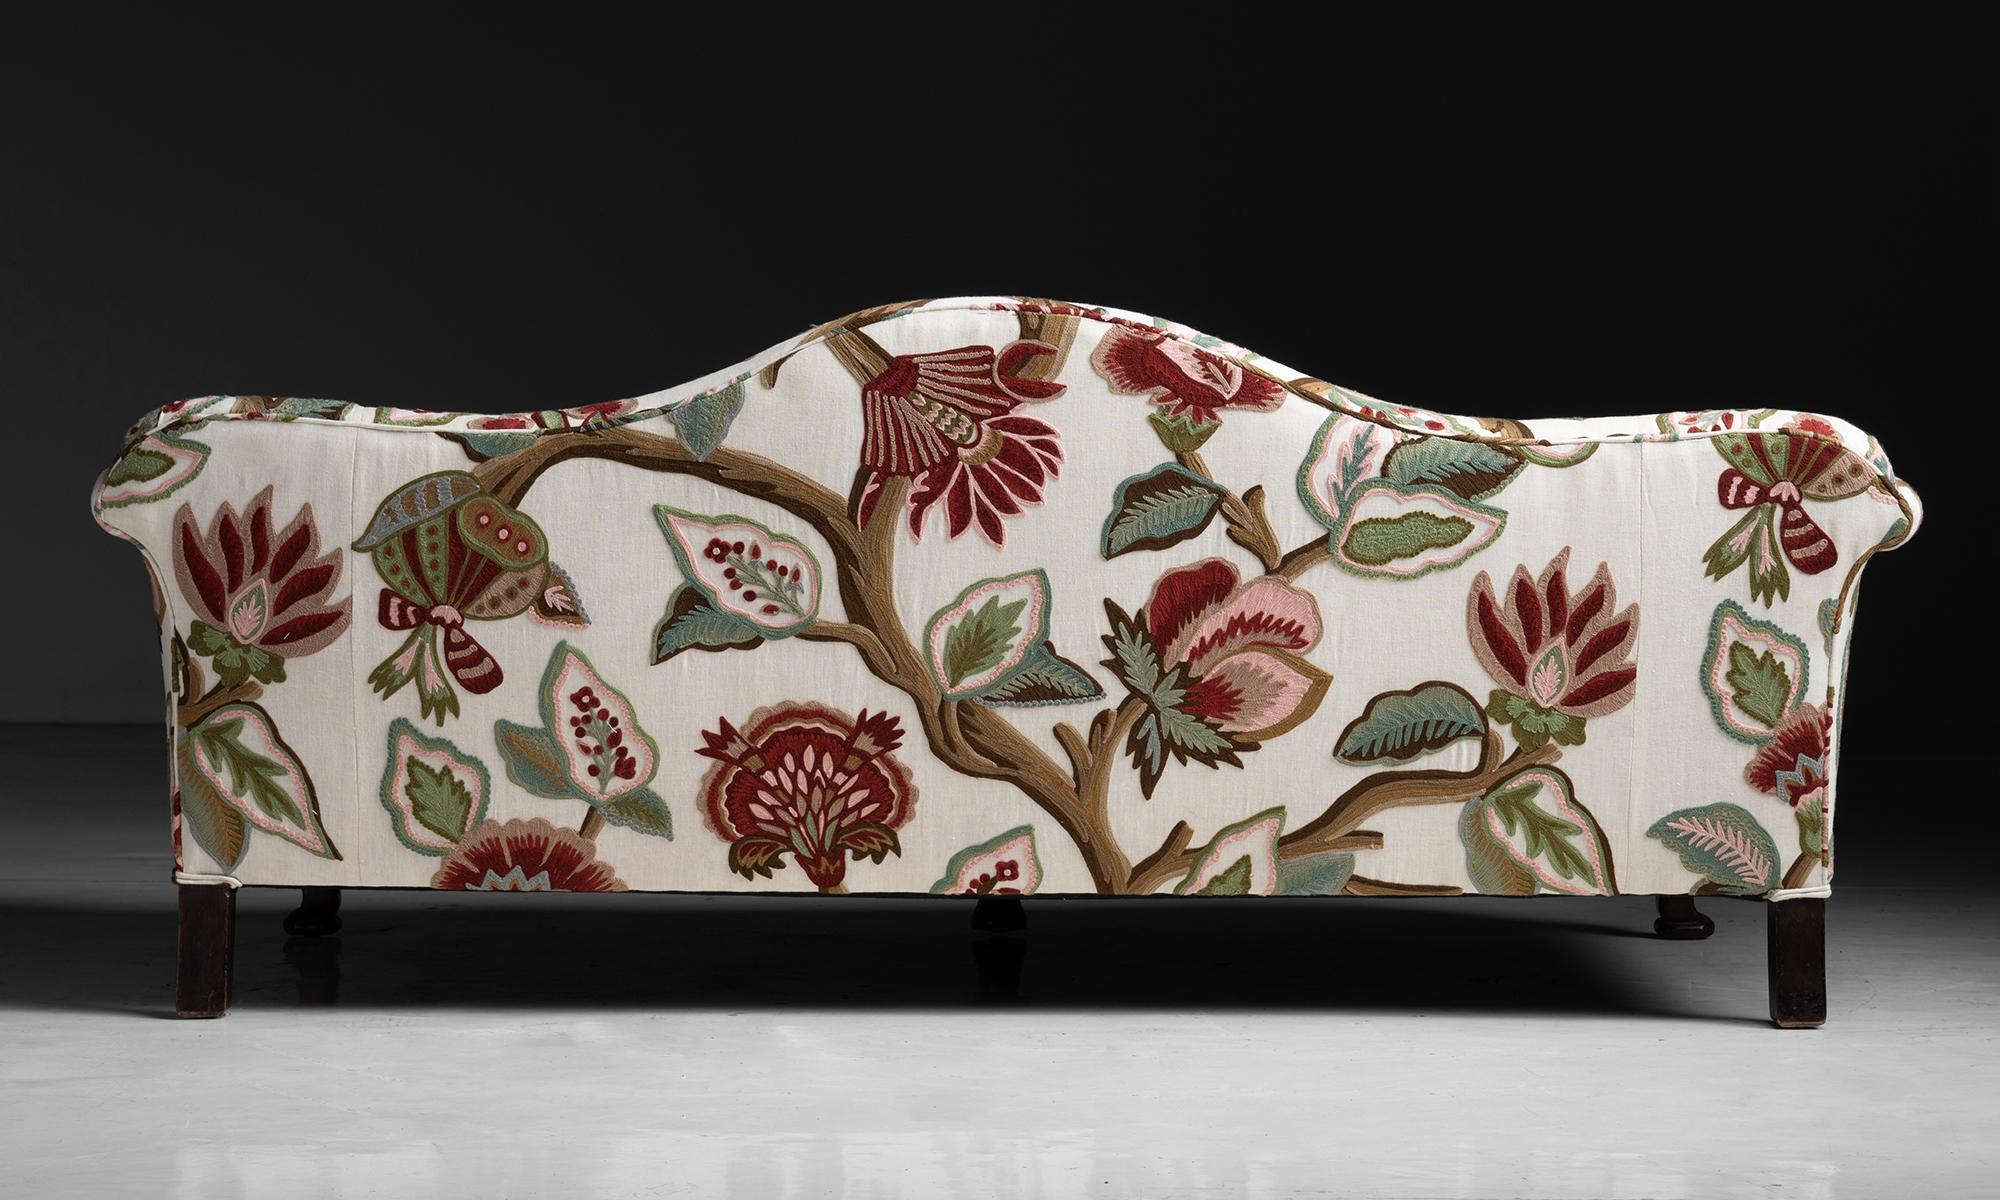 20th Century Sofa in Embroidered Linen by Pierre Frey, England circa 1900 For Sale